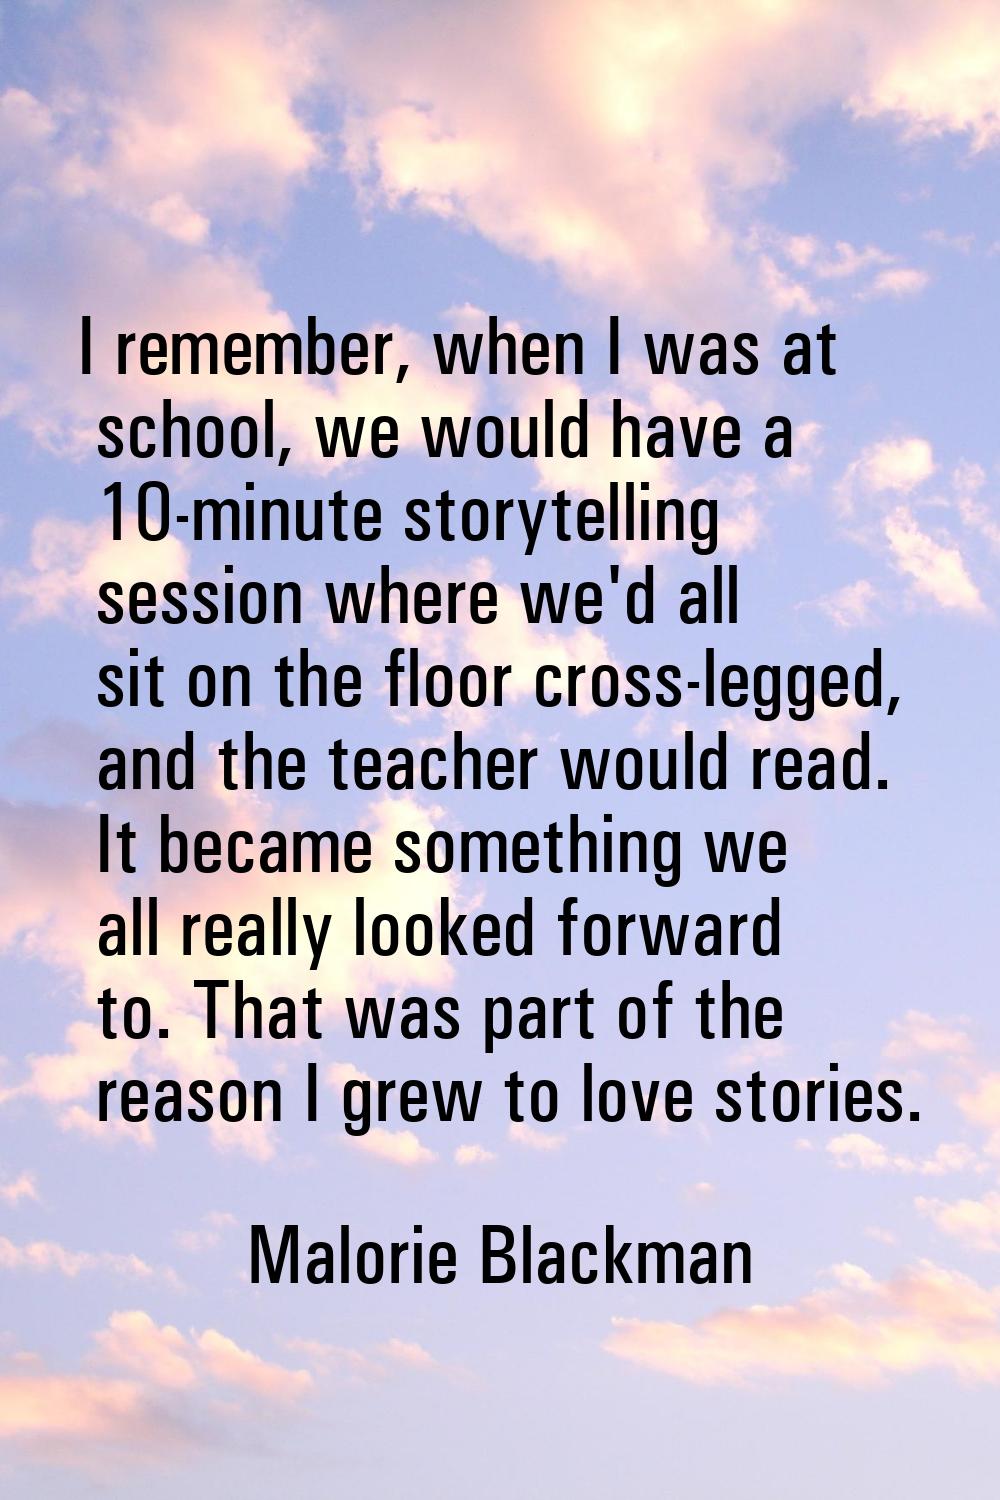 I remember, when I was at school, we would have a 10-minute storytelling session where we'd all sit